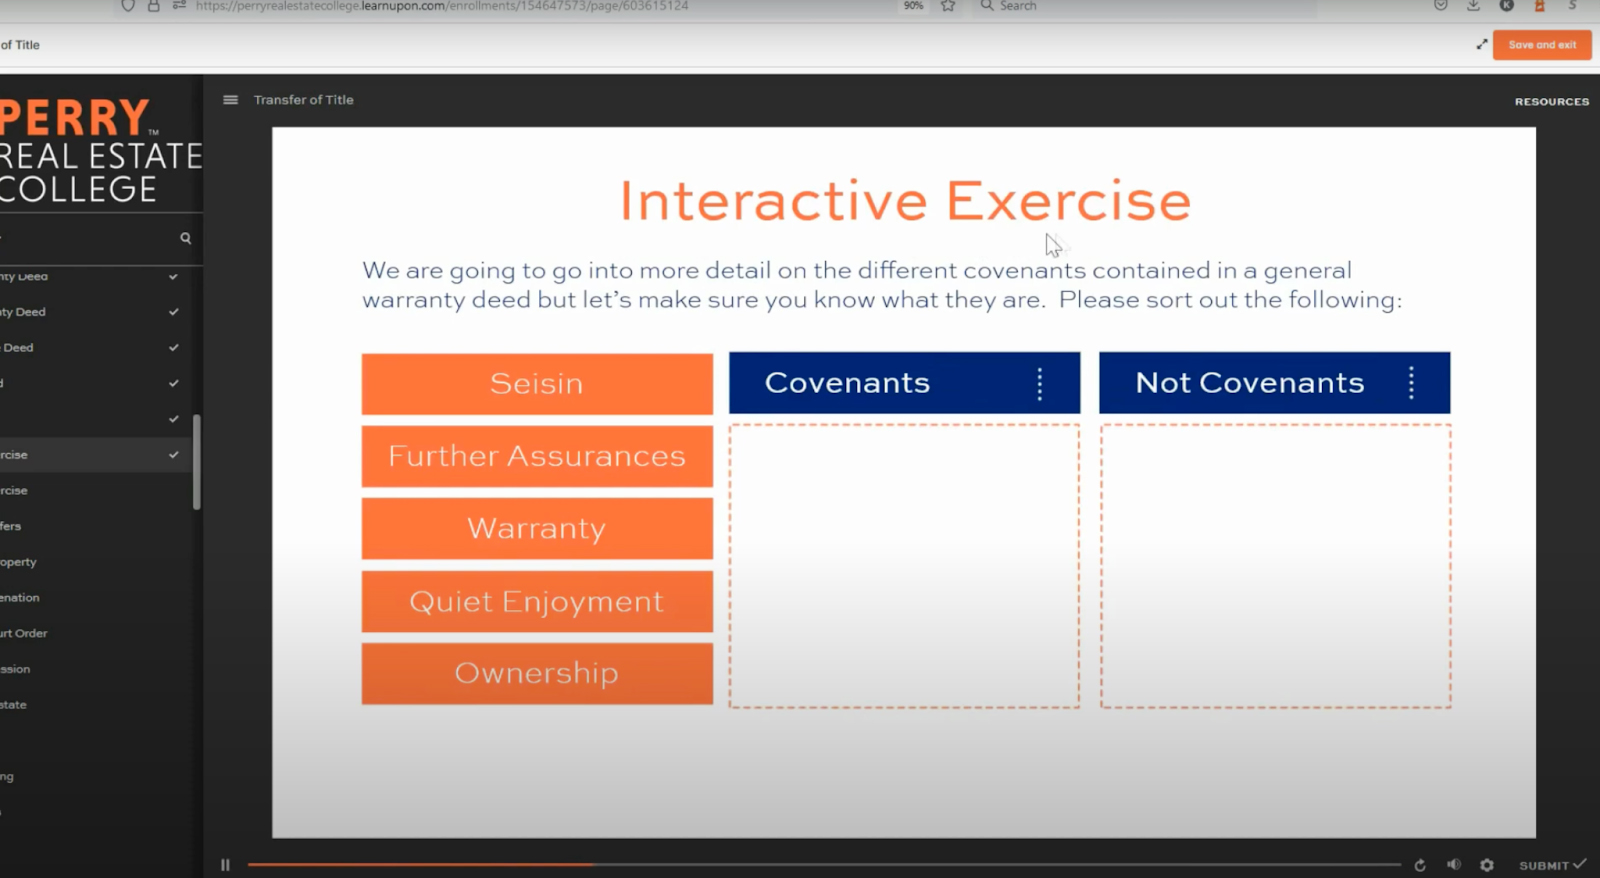 Perry Real Estate College interactive exercise screenshot.